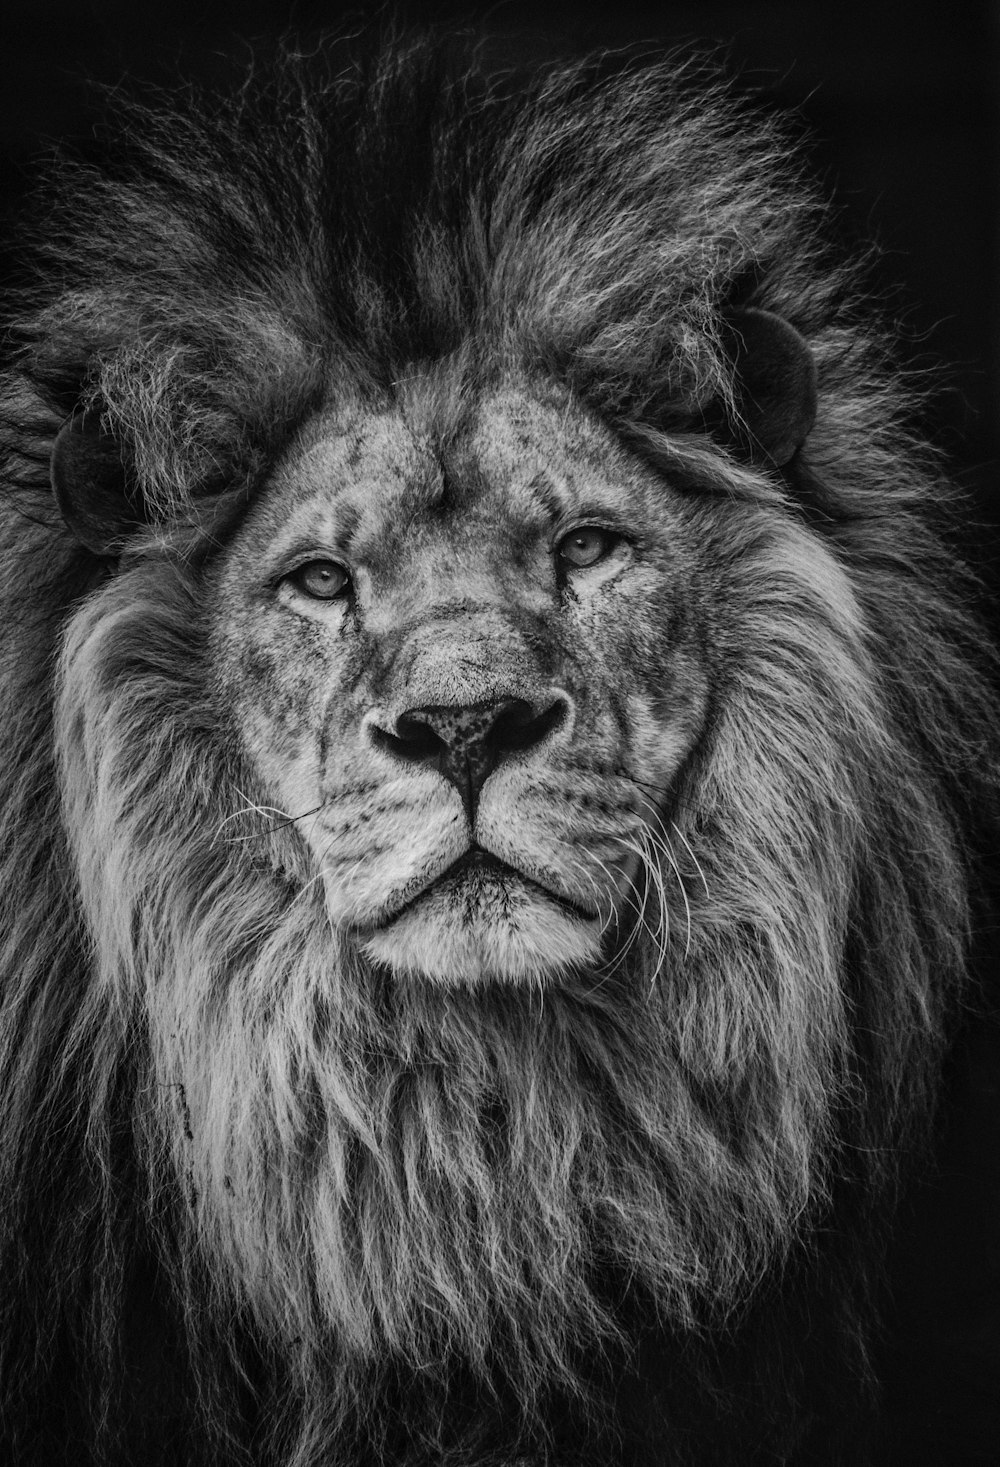 500+ Lion Face Pictures | Download Free Images & Stock Photos on Unsplash